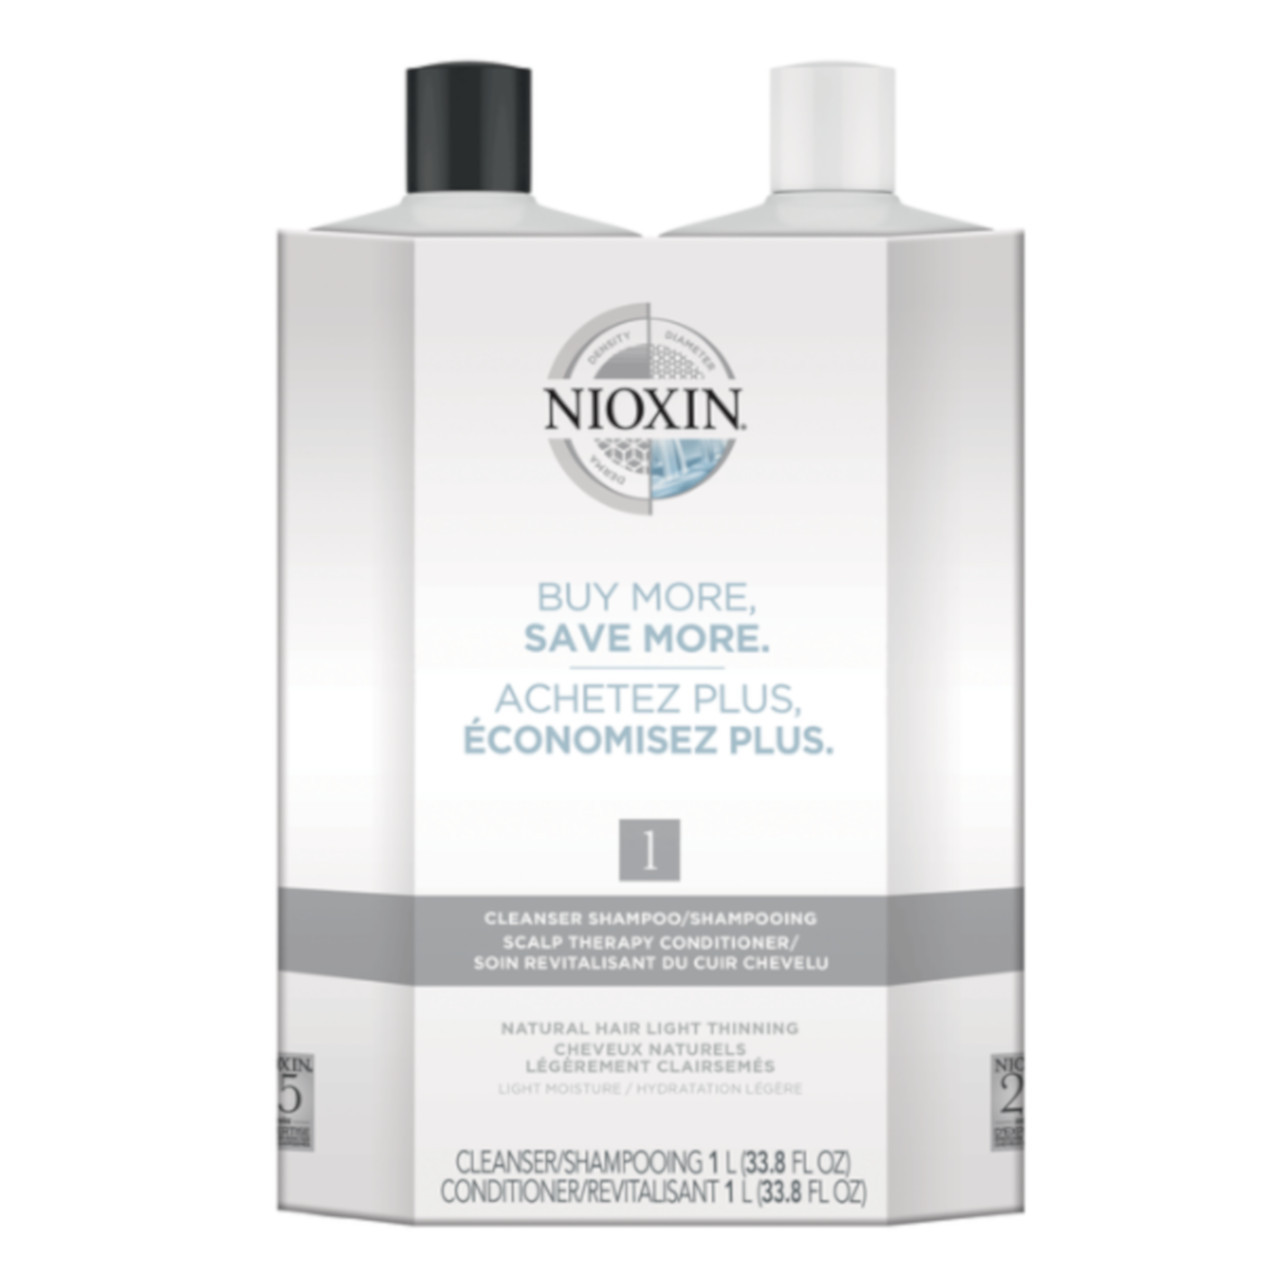 Nioxin System 1 Cleanser, Scalp Therapy Liter Duo